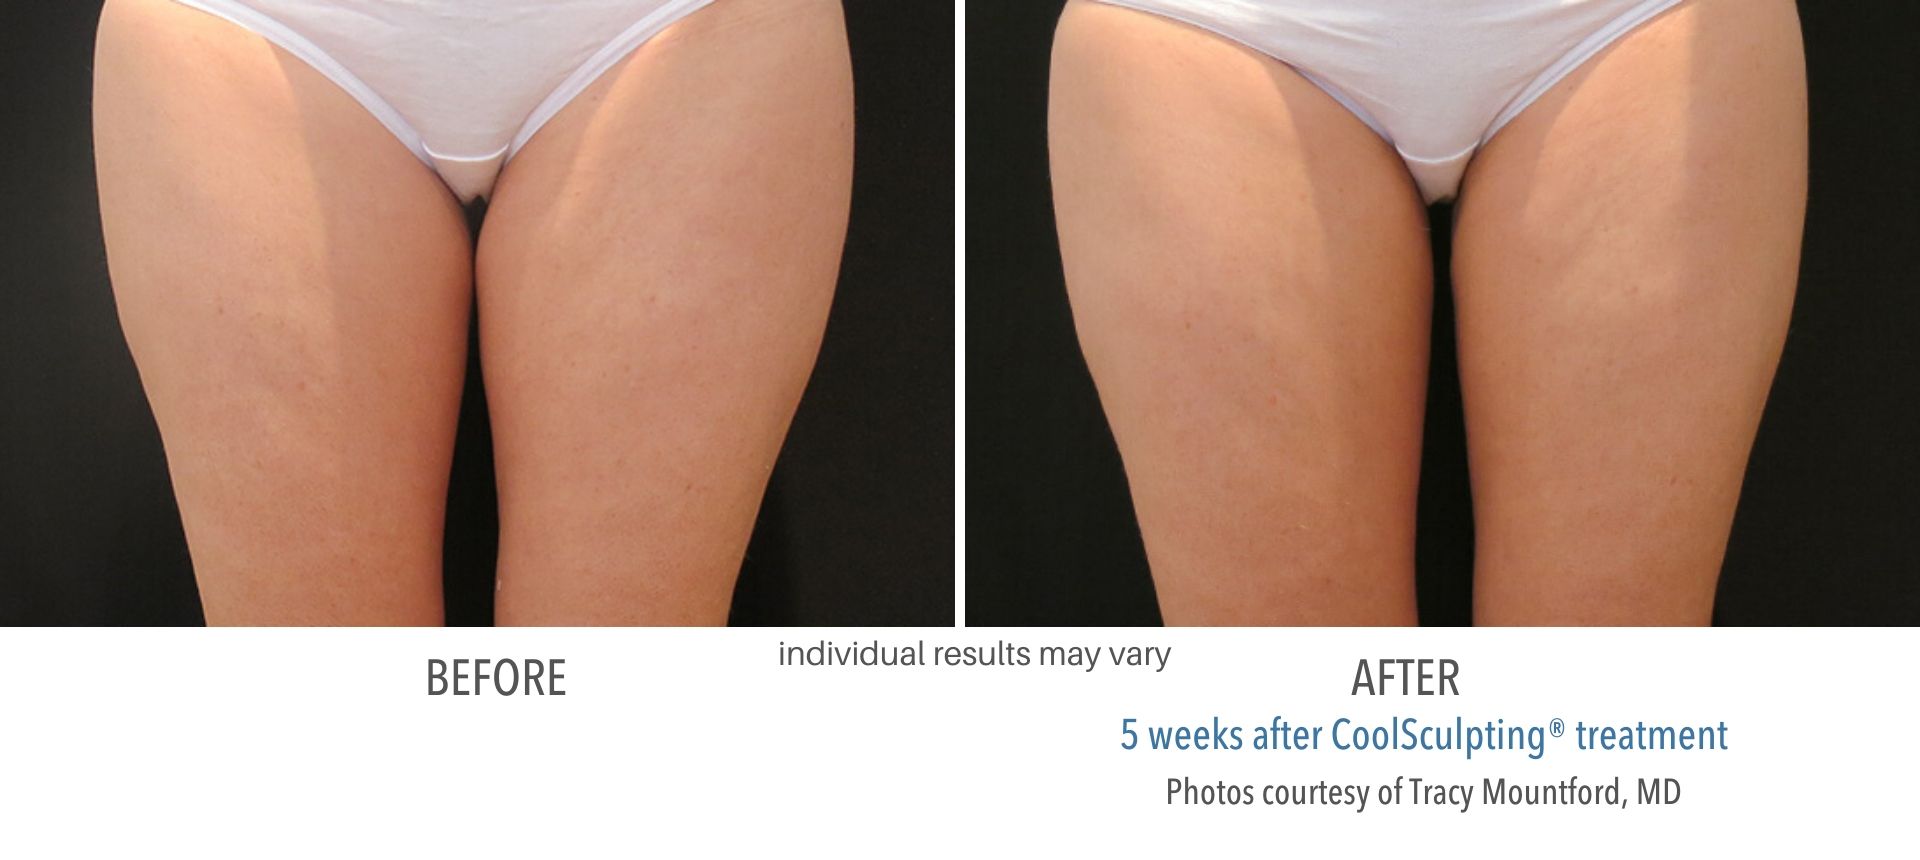 coolsculpting before and after thigh fat Laser + Skin Institute in Chatham, NJ